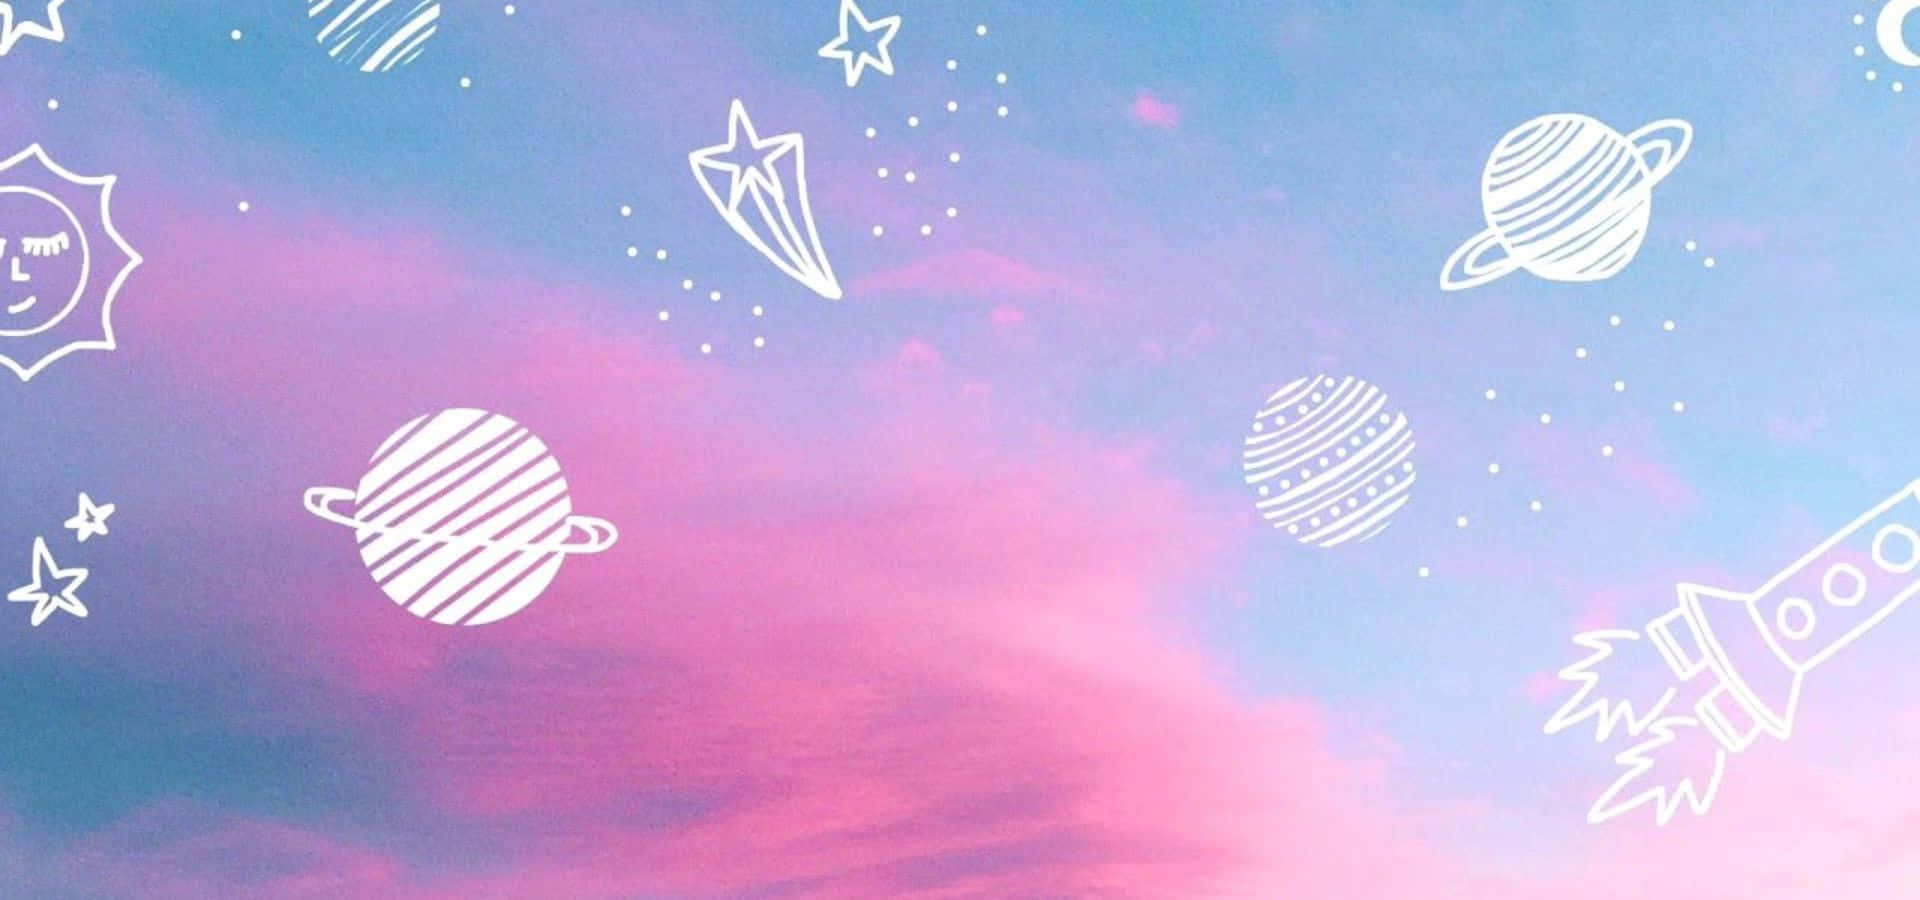 A Pink Sky With Stars And Planets Drawn On It